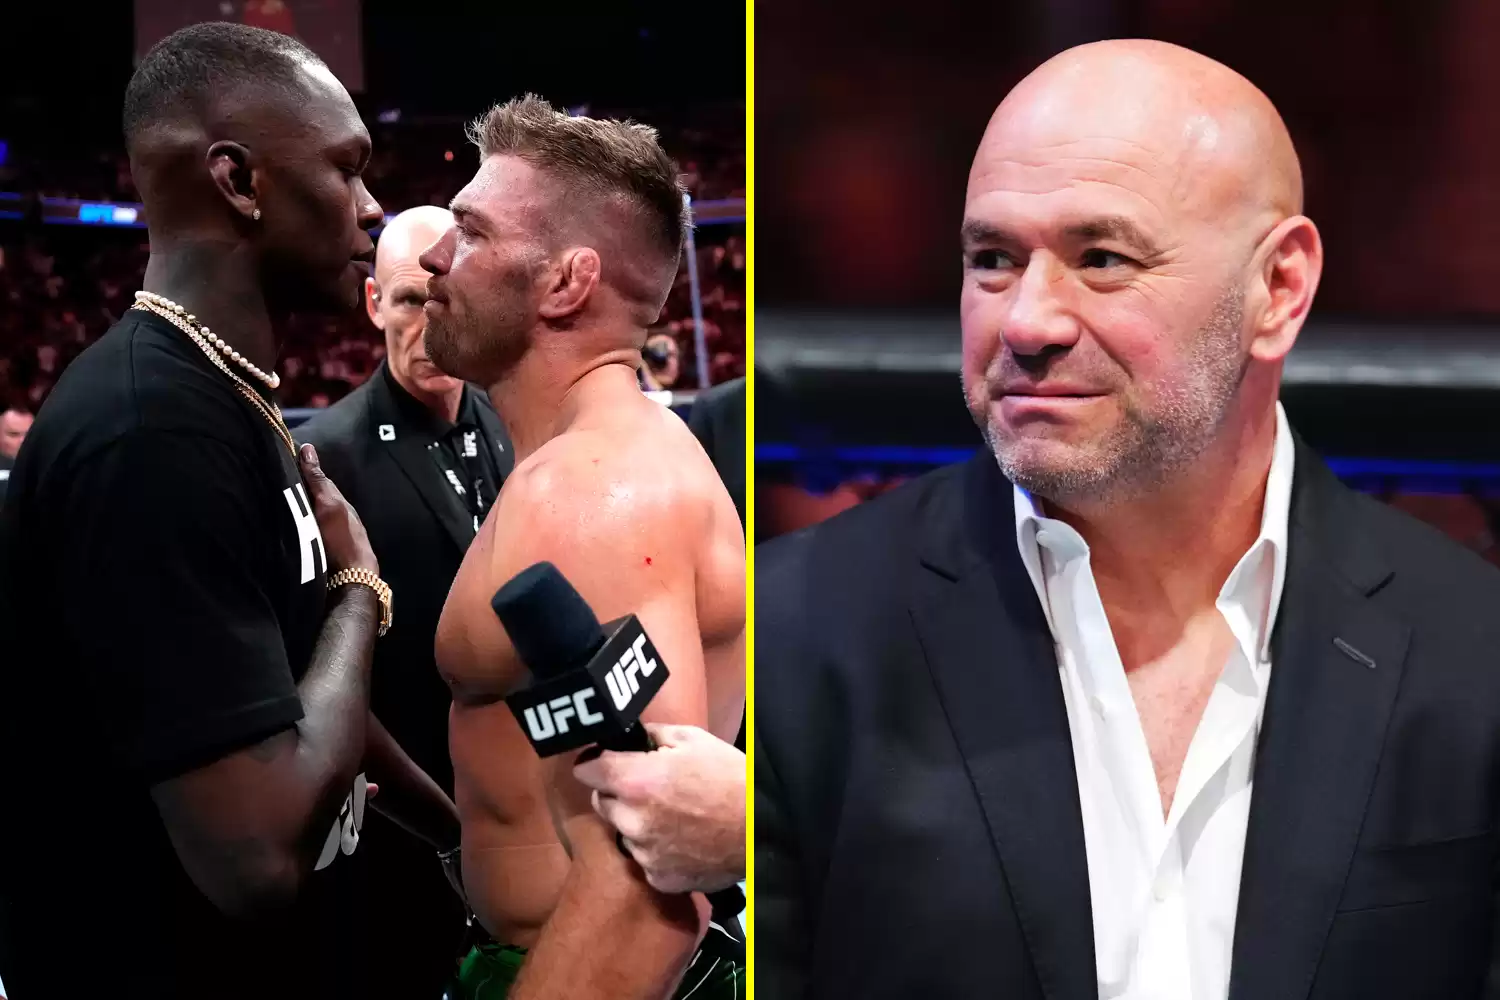 Dana White's response to controversial exchange with Israel Adesanya gains widespread attention for alleged racial implications